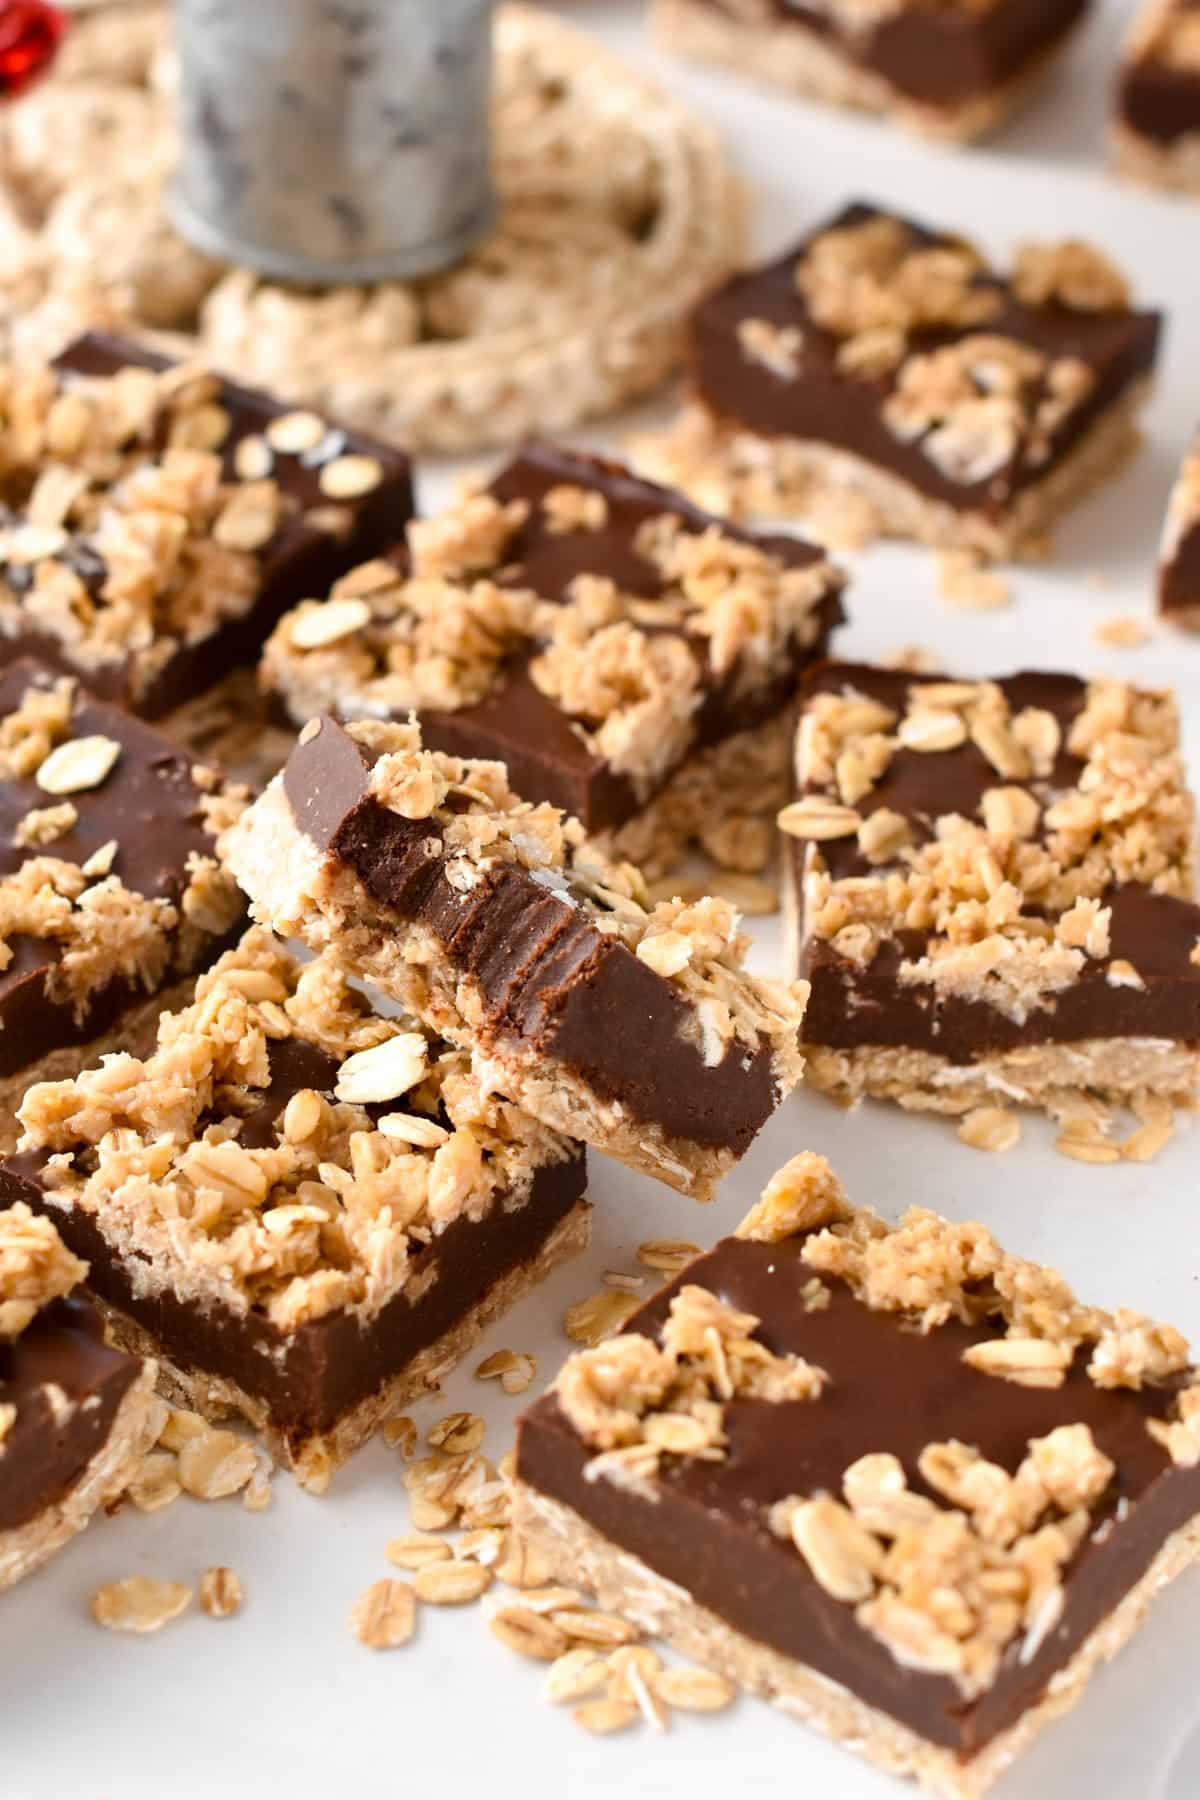 No-Bake Chocolate Peanut Butter Oatmeal Bars sprinkled with oats.